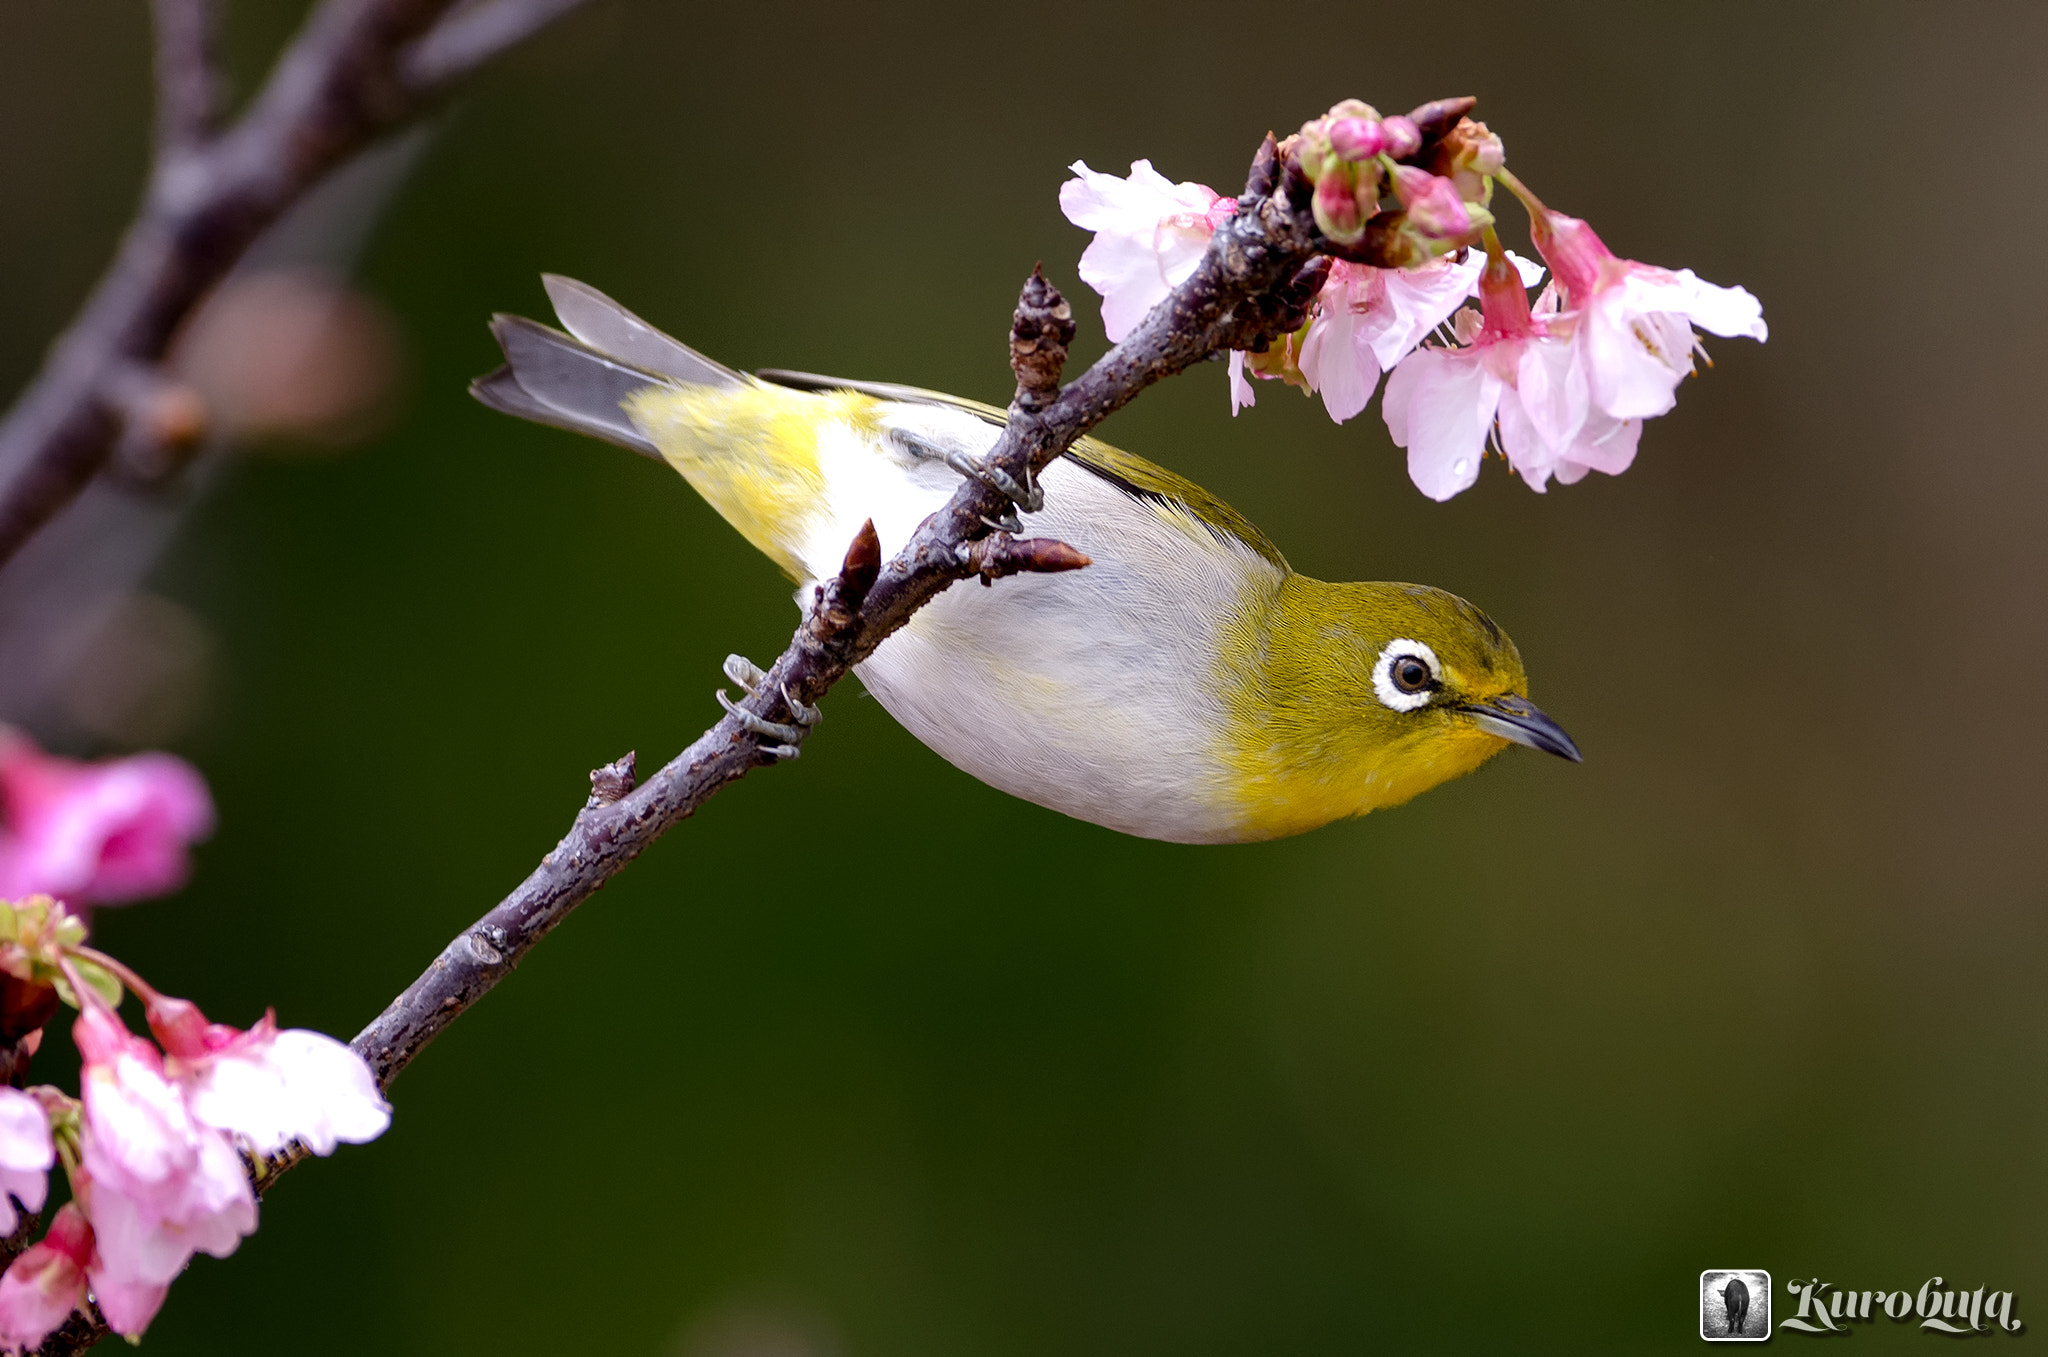 Pentax K-5 IIs sample photo. White eye and cherry blossoms photography